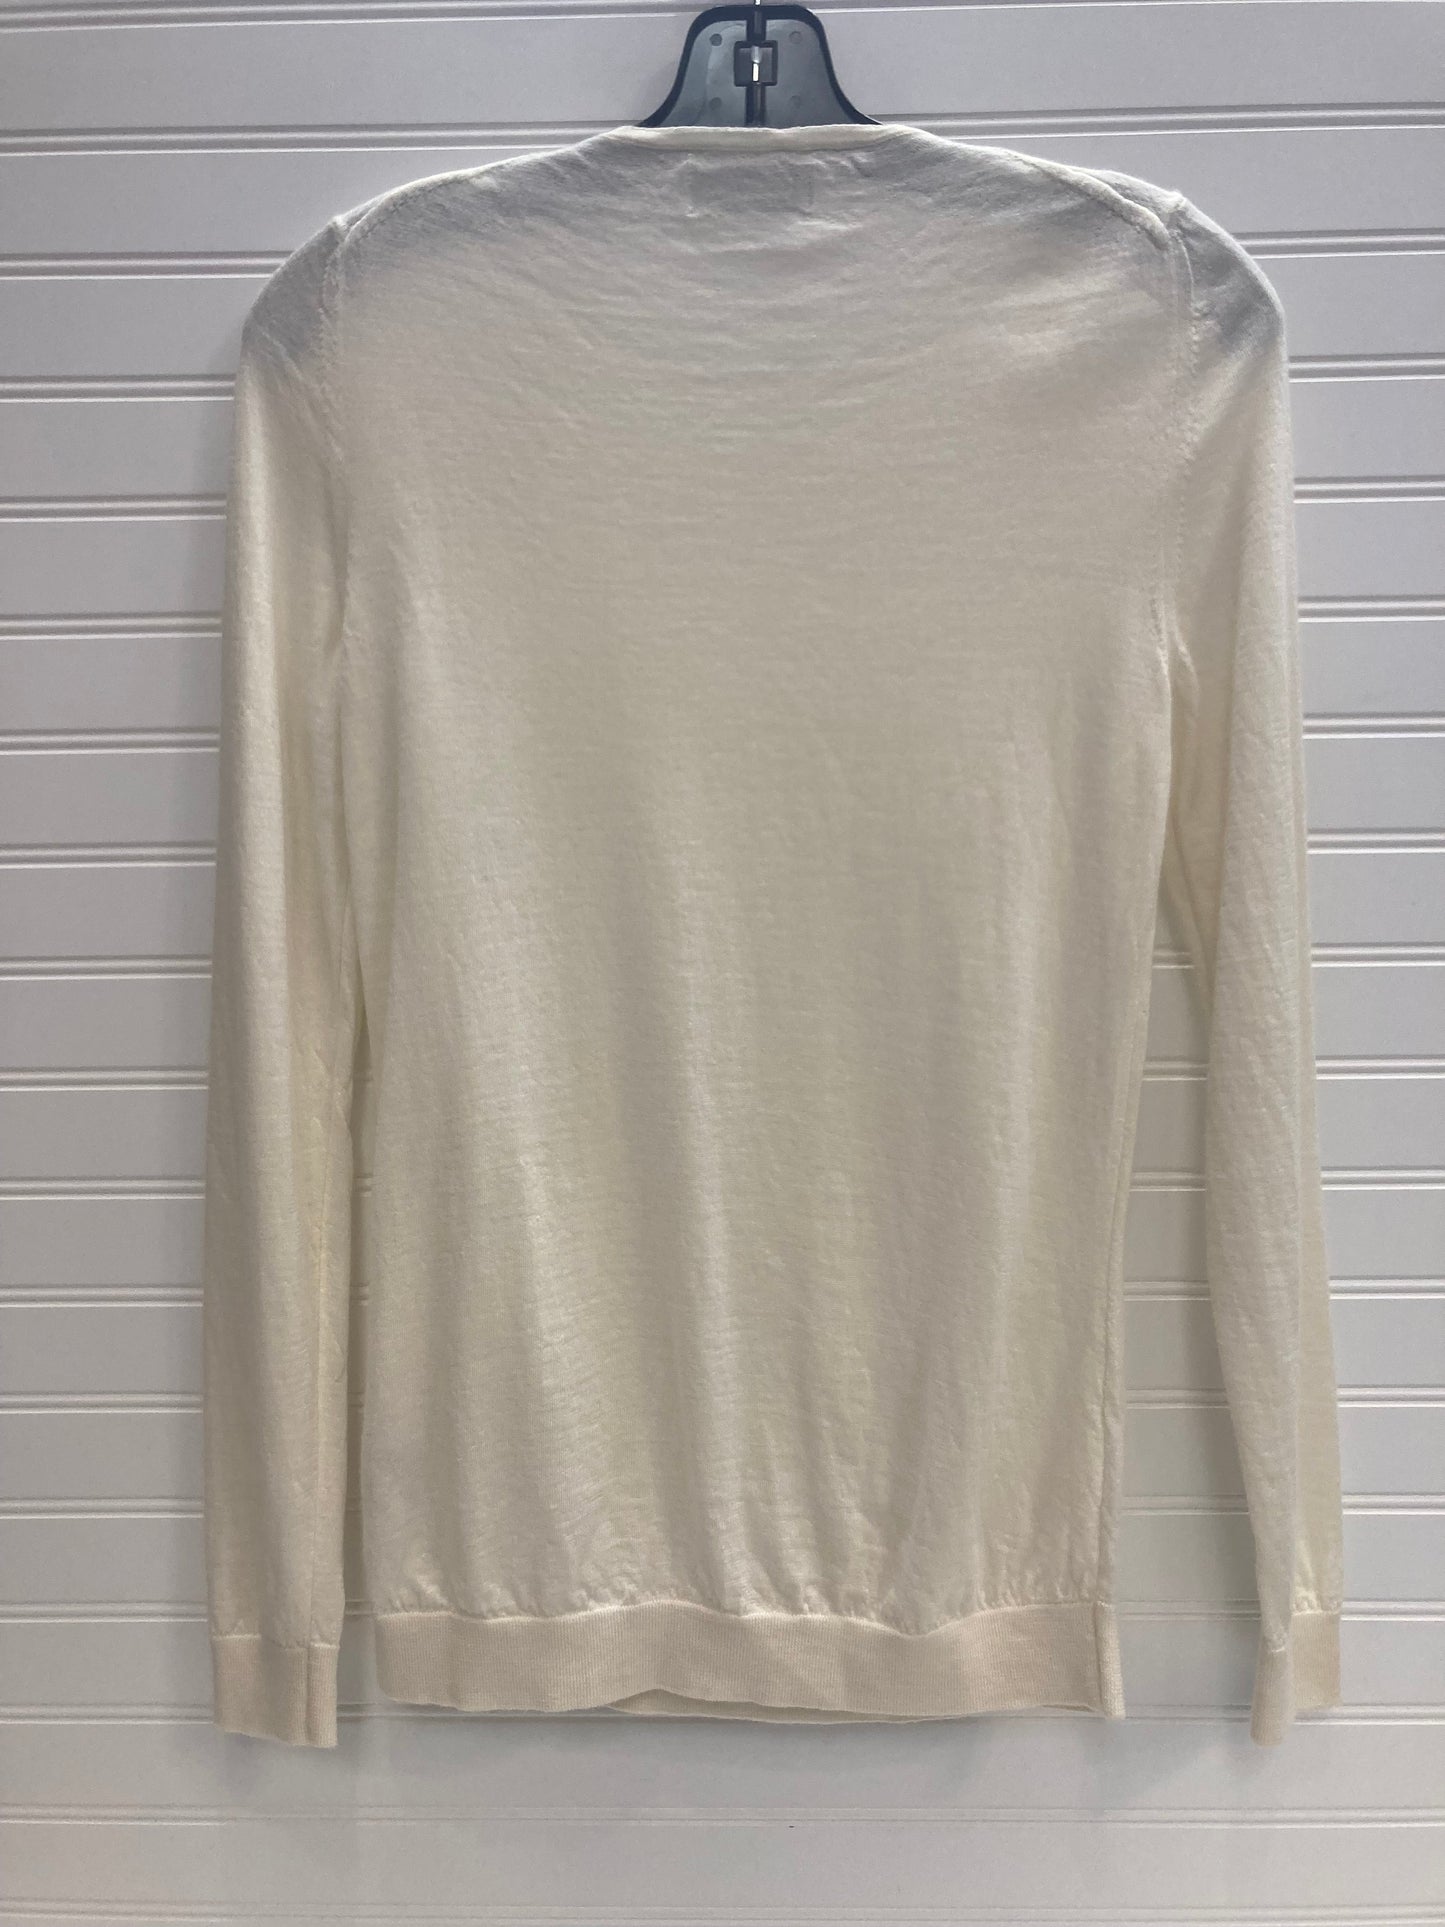 Sweater Cashmere By Falconeri  Size: L